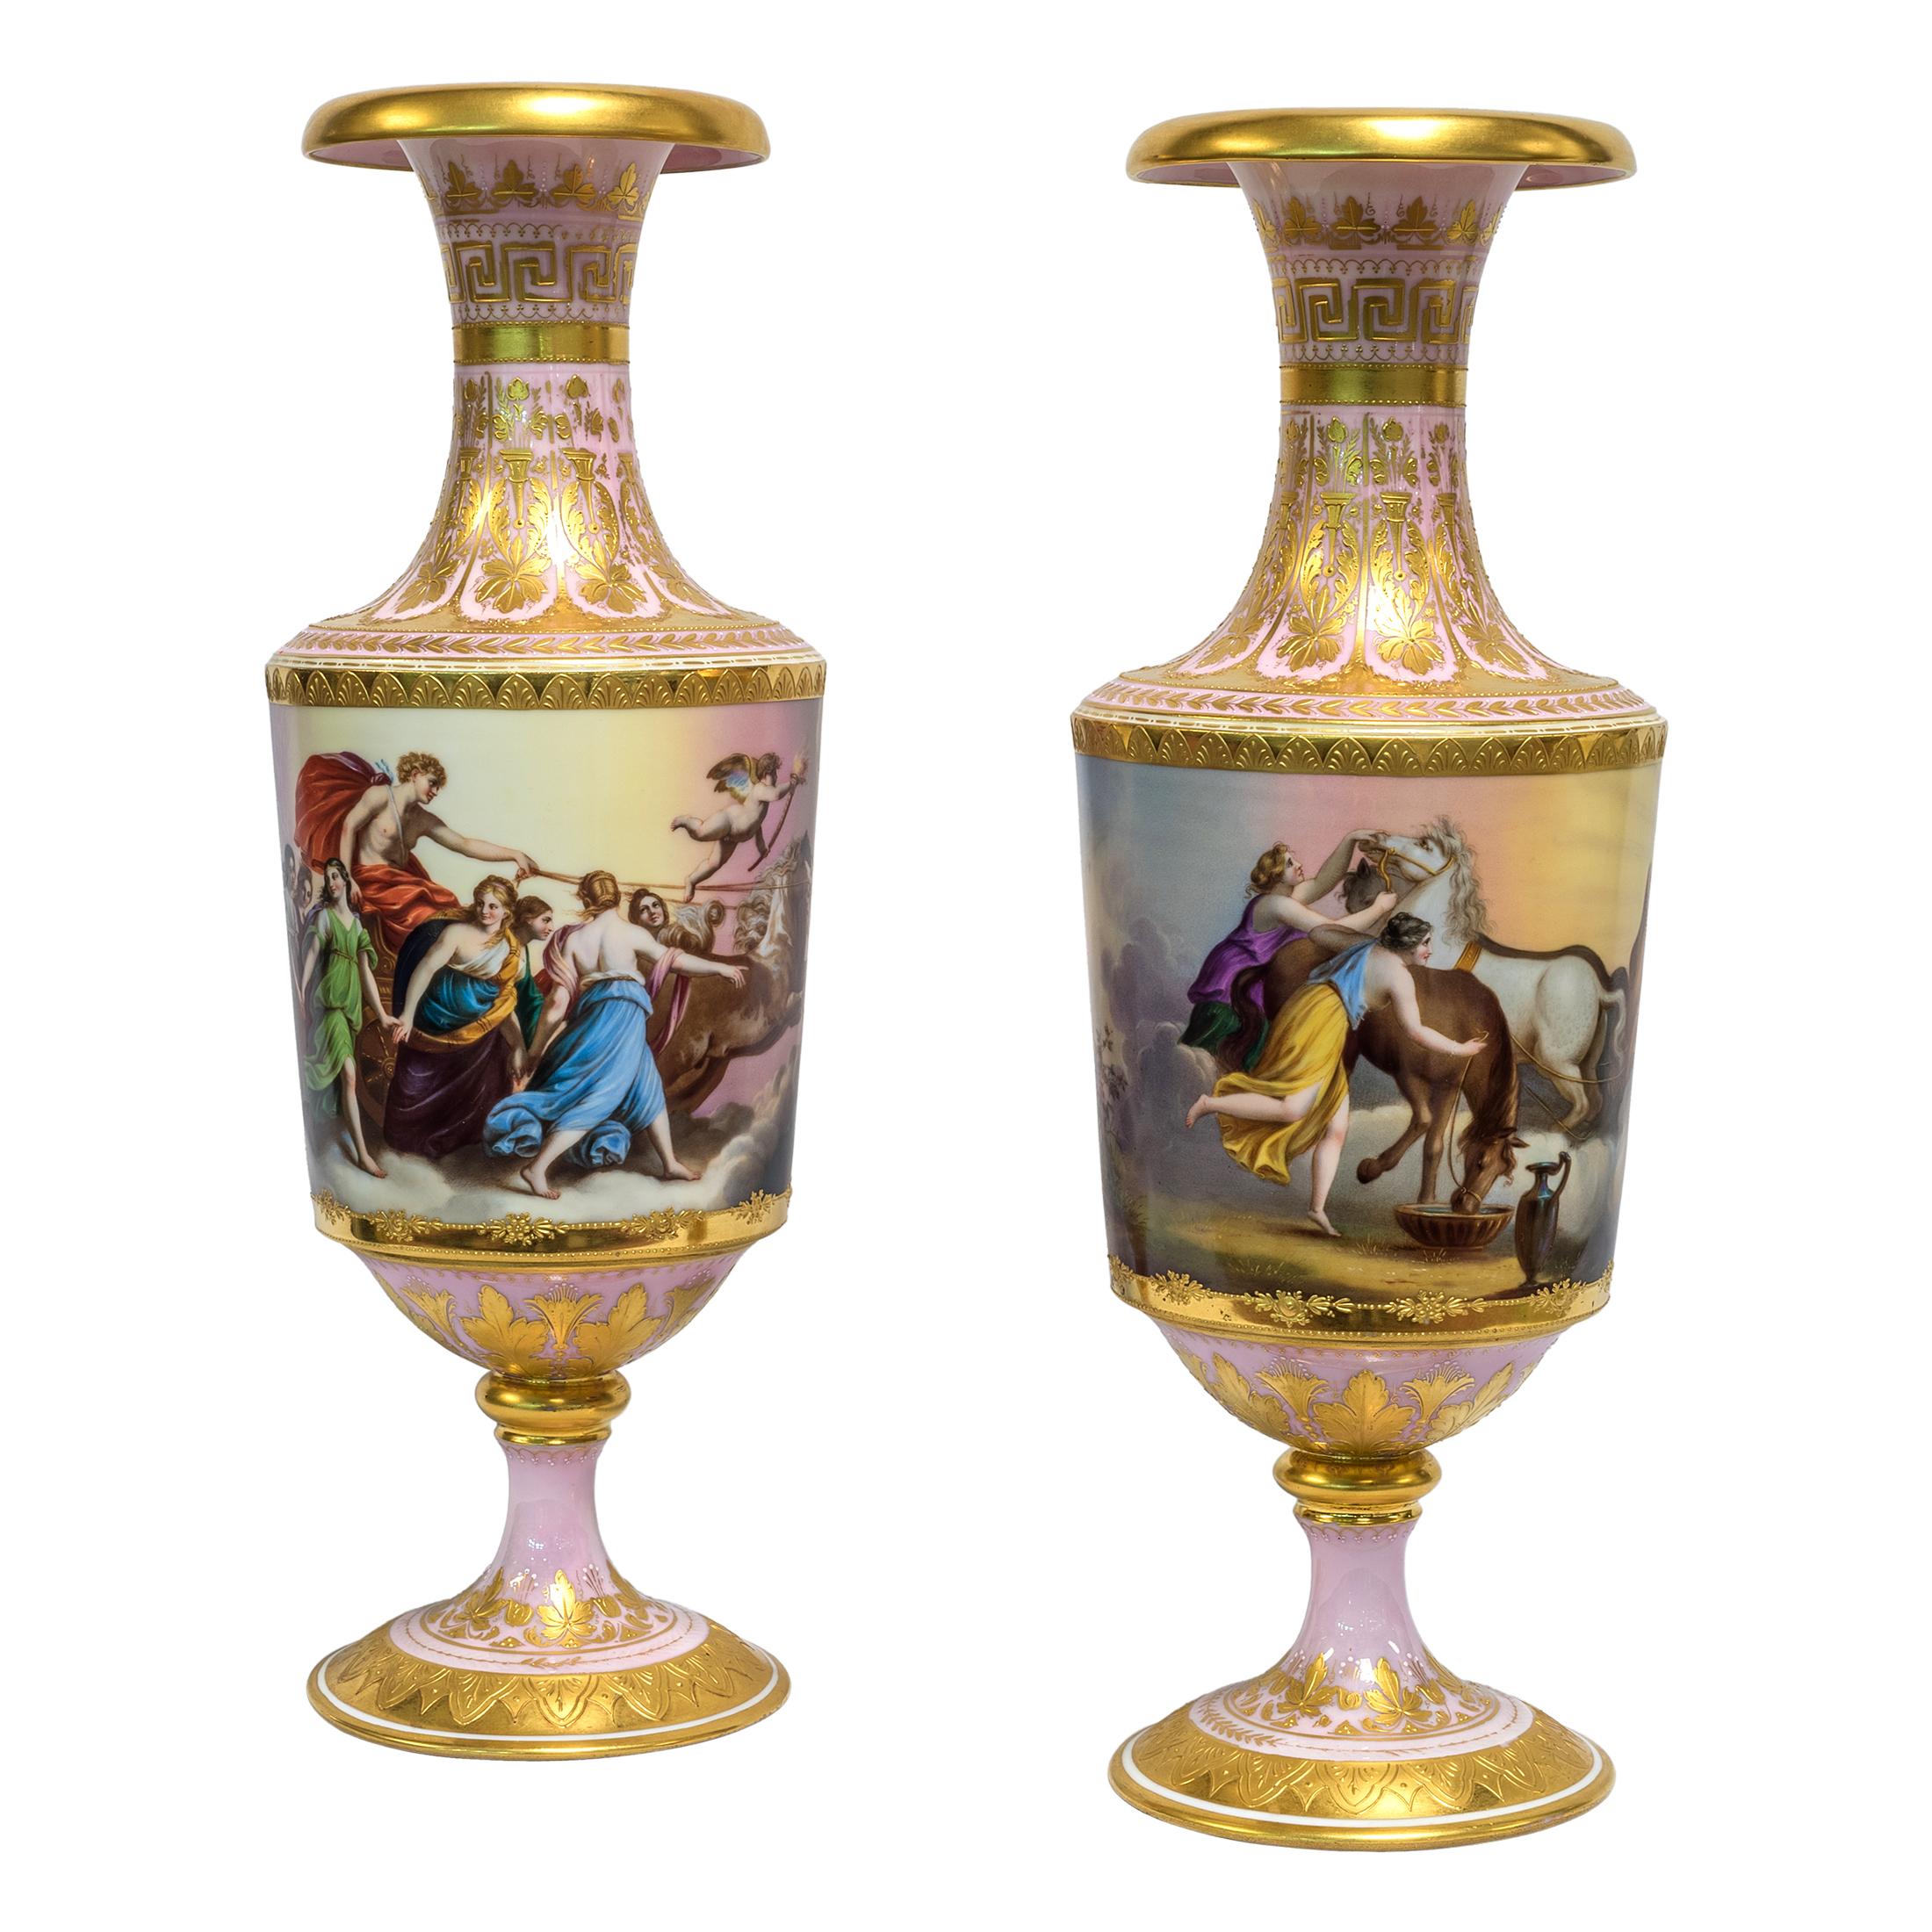 Pair of exceptional Austrian Royal Vienna ormolu-mounted porcelain vase. The center with finely painted allegorical scenes, signed ‘Aurora’, the underside of base with impressed bee hive mark.

Date: circa 1890
Origin: Austrian
Dimension: 16 5/8